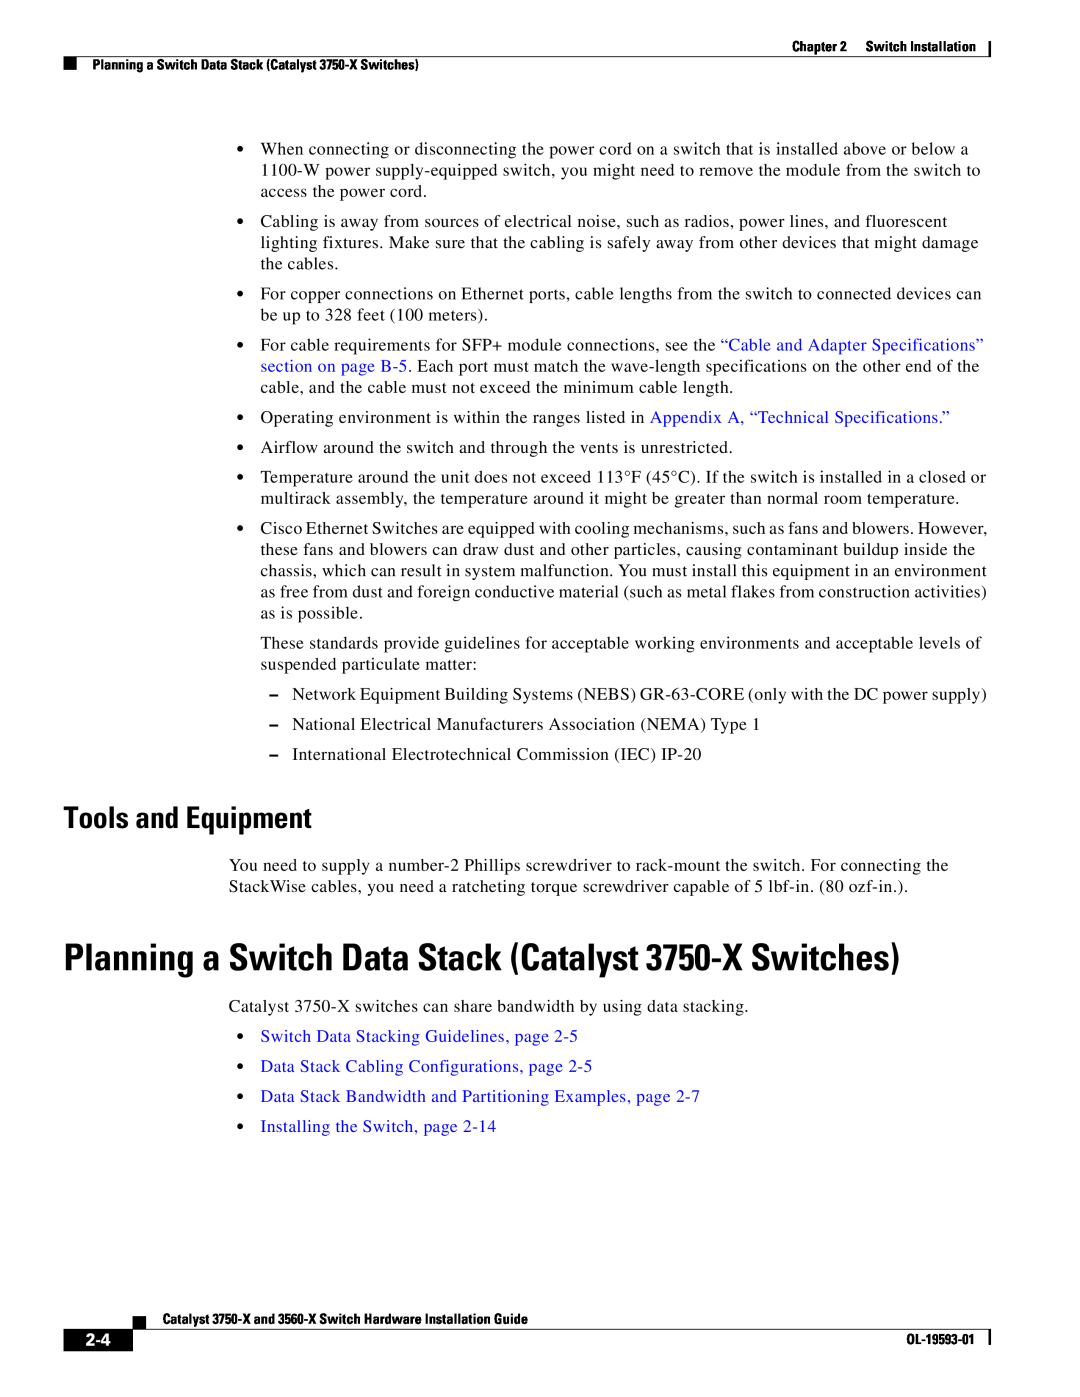 Cisco Systems Planning a Switch Data Stack Catalyst 3750-X Switches, Tools and Equipment, Installing the Switch, page 